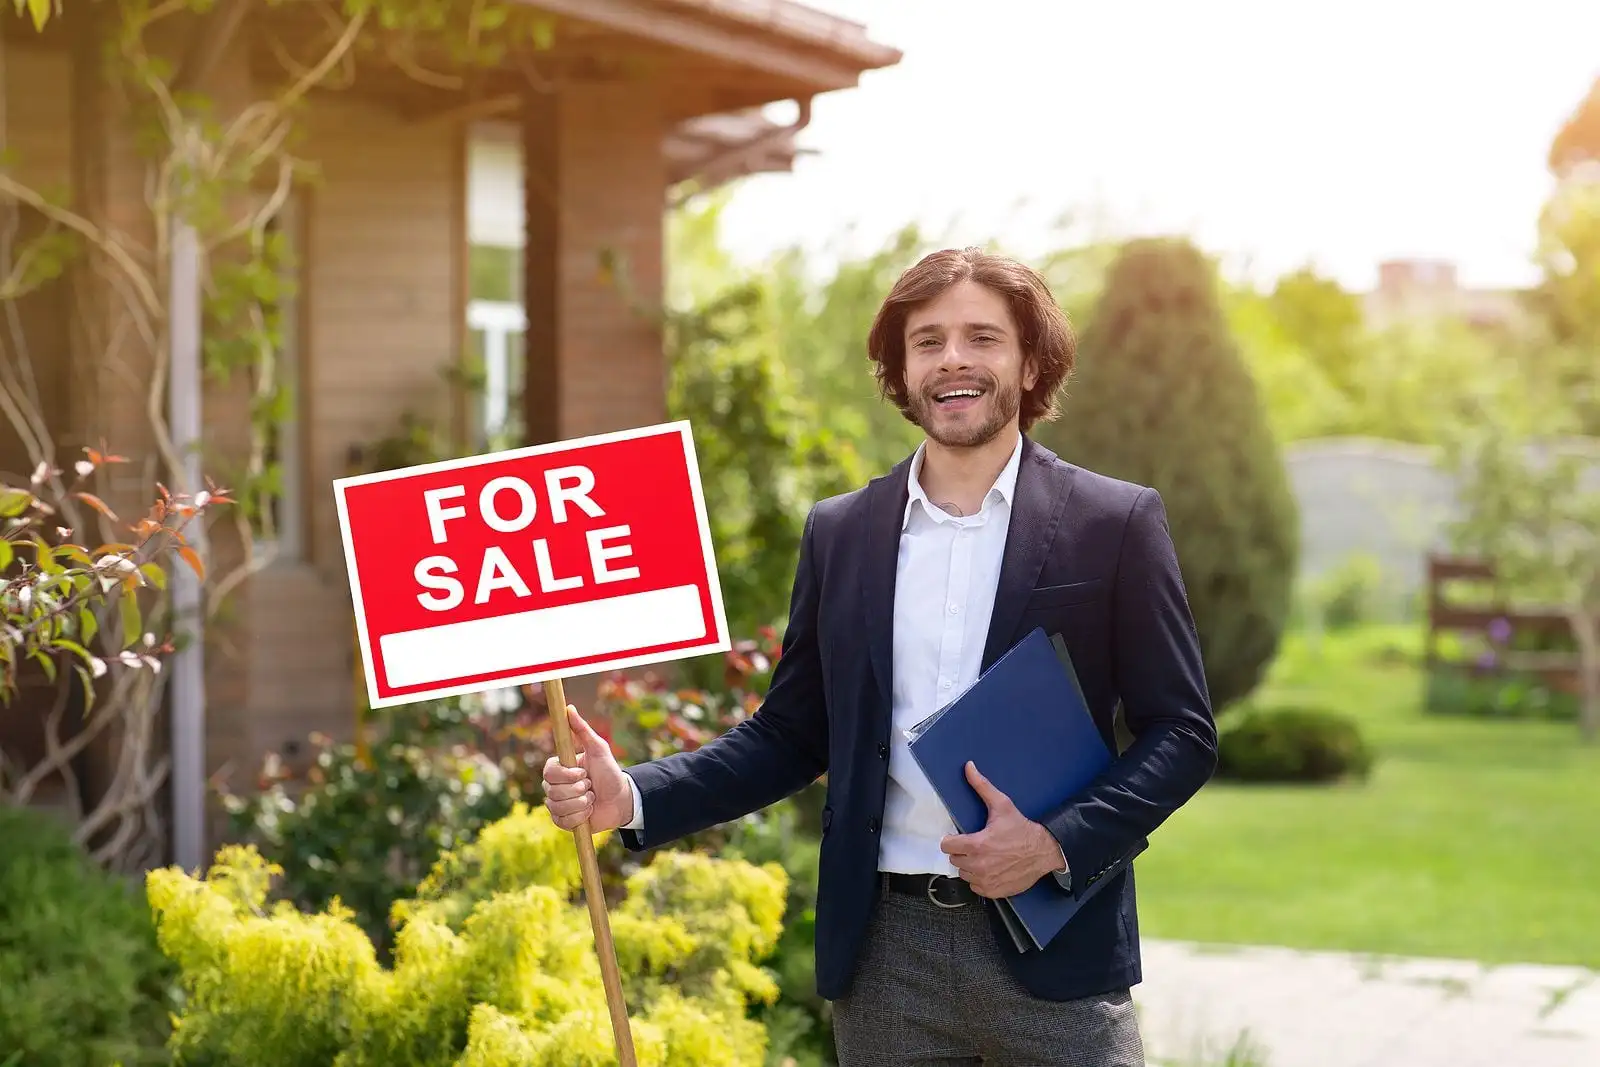 How to Choose a Real Estate Agent for Buying